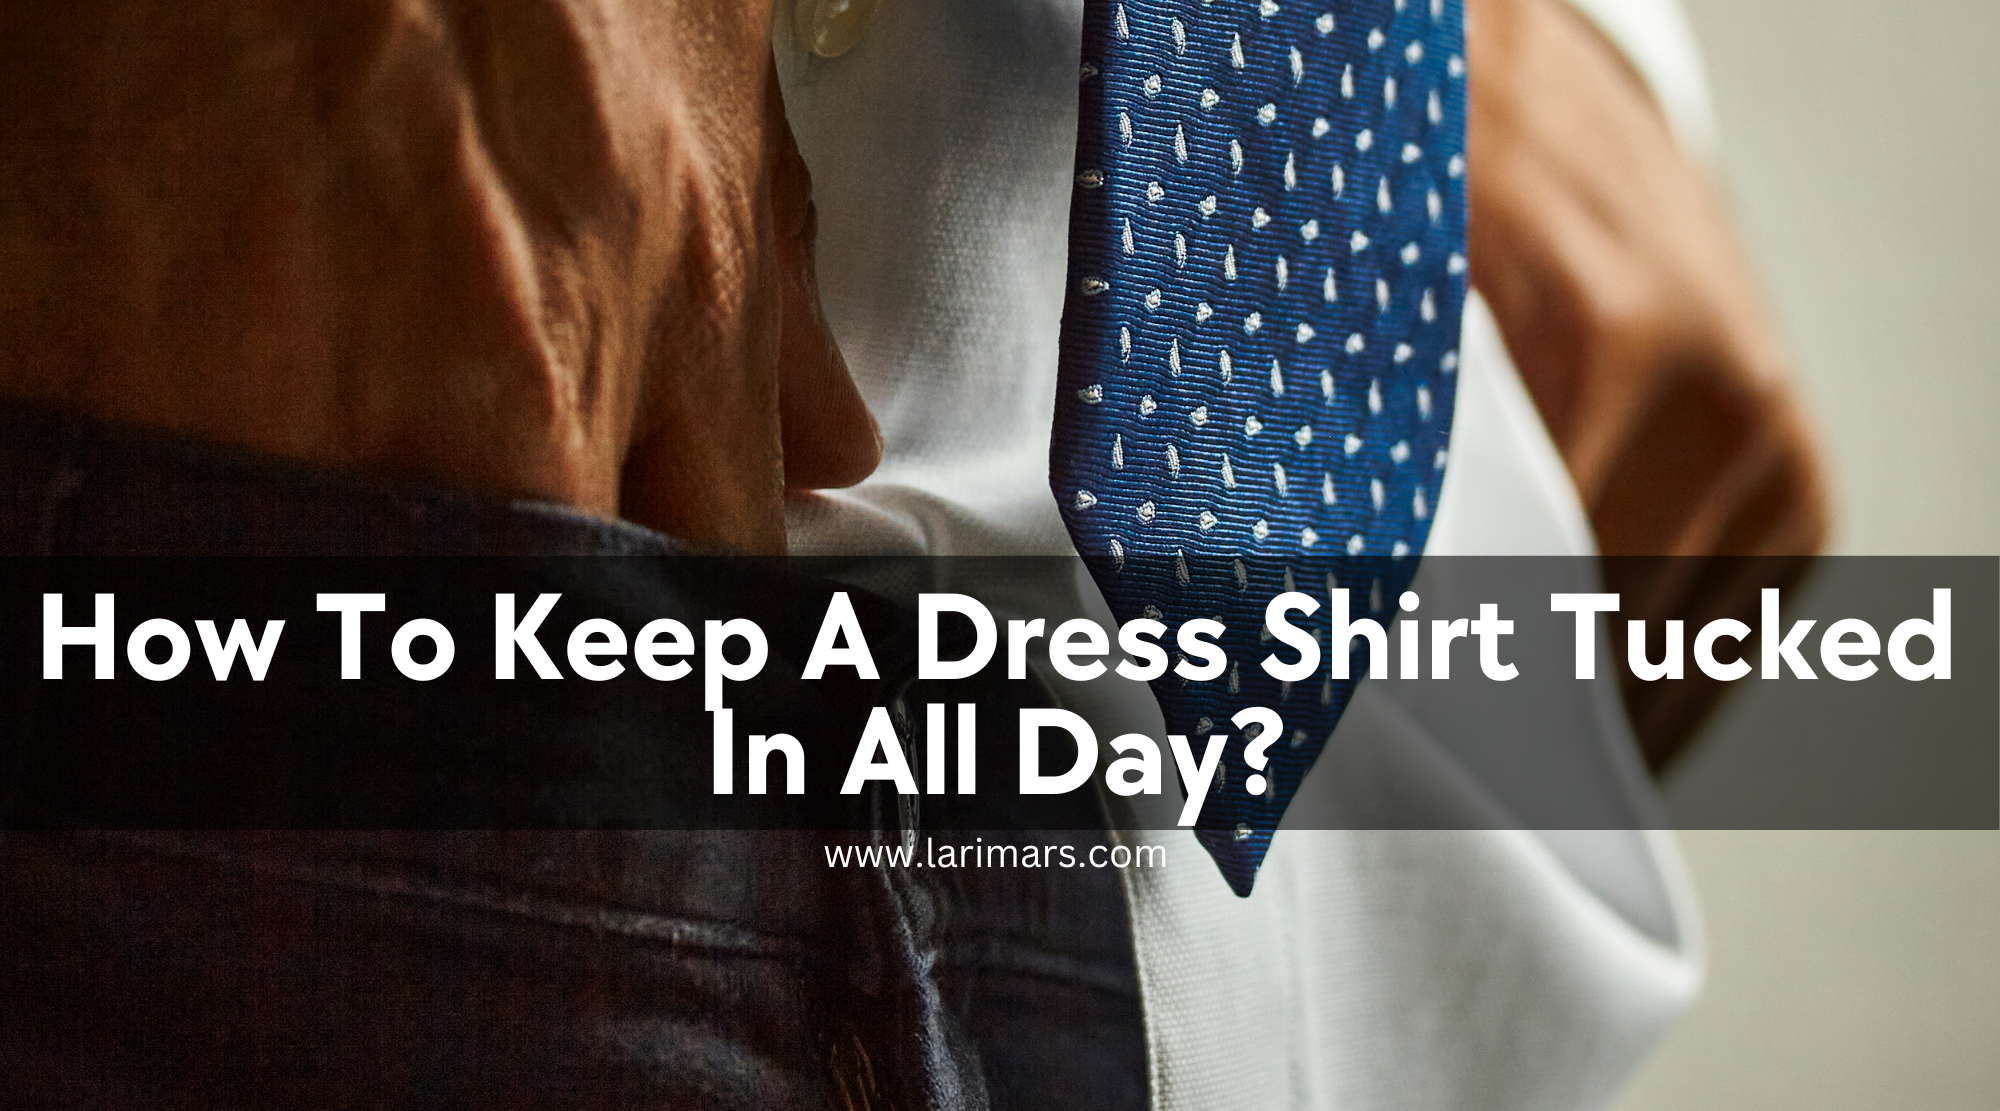 Keep A Dress Shirt Tucked In All Day